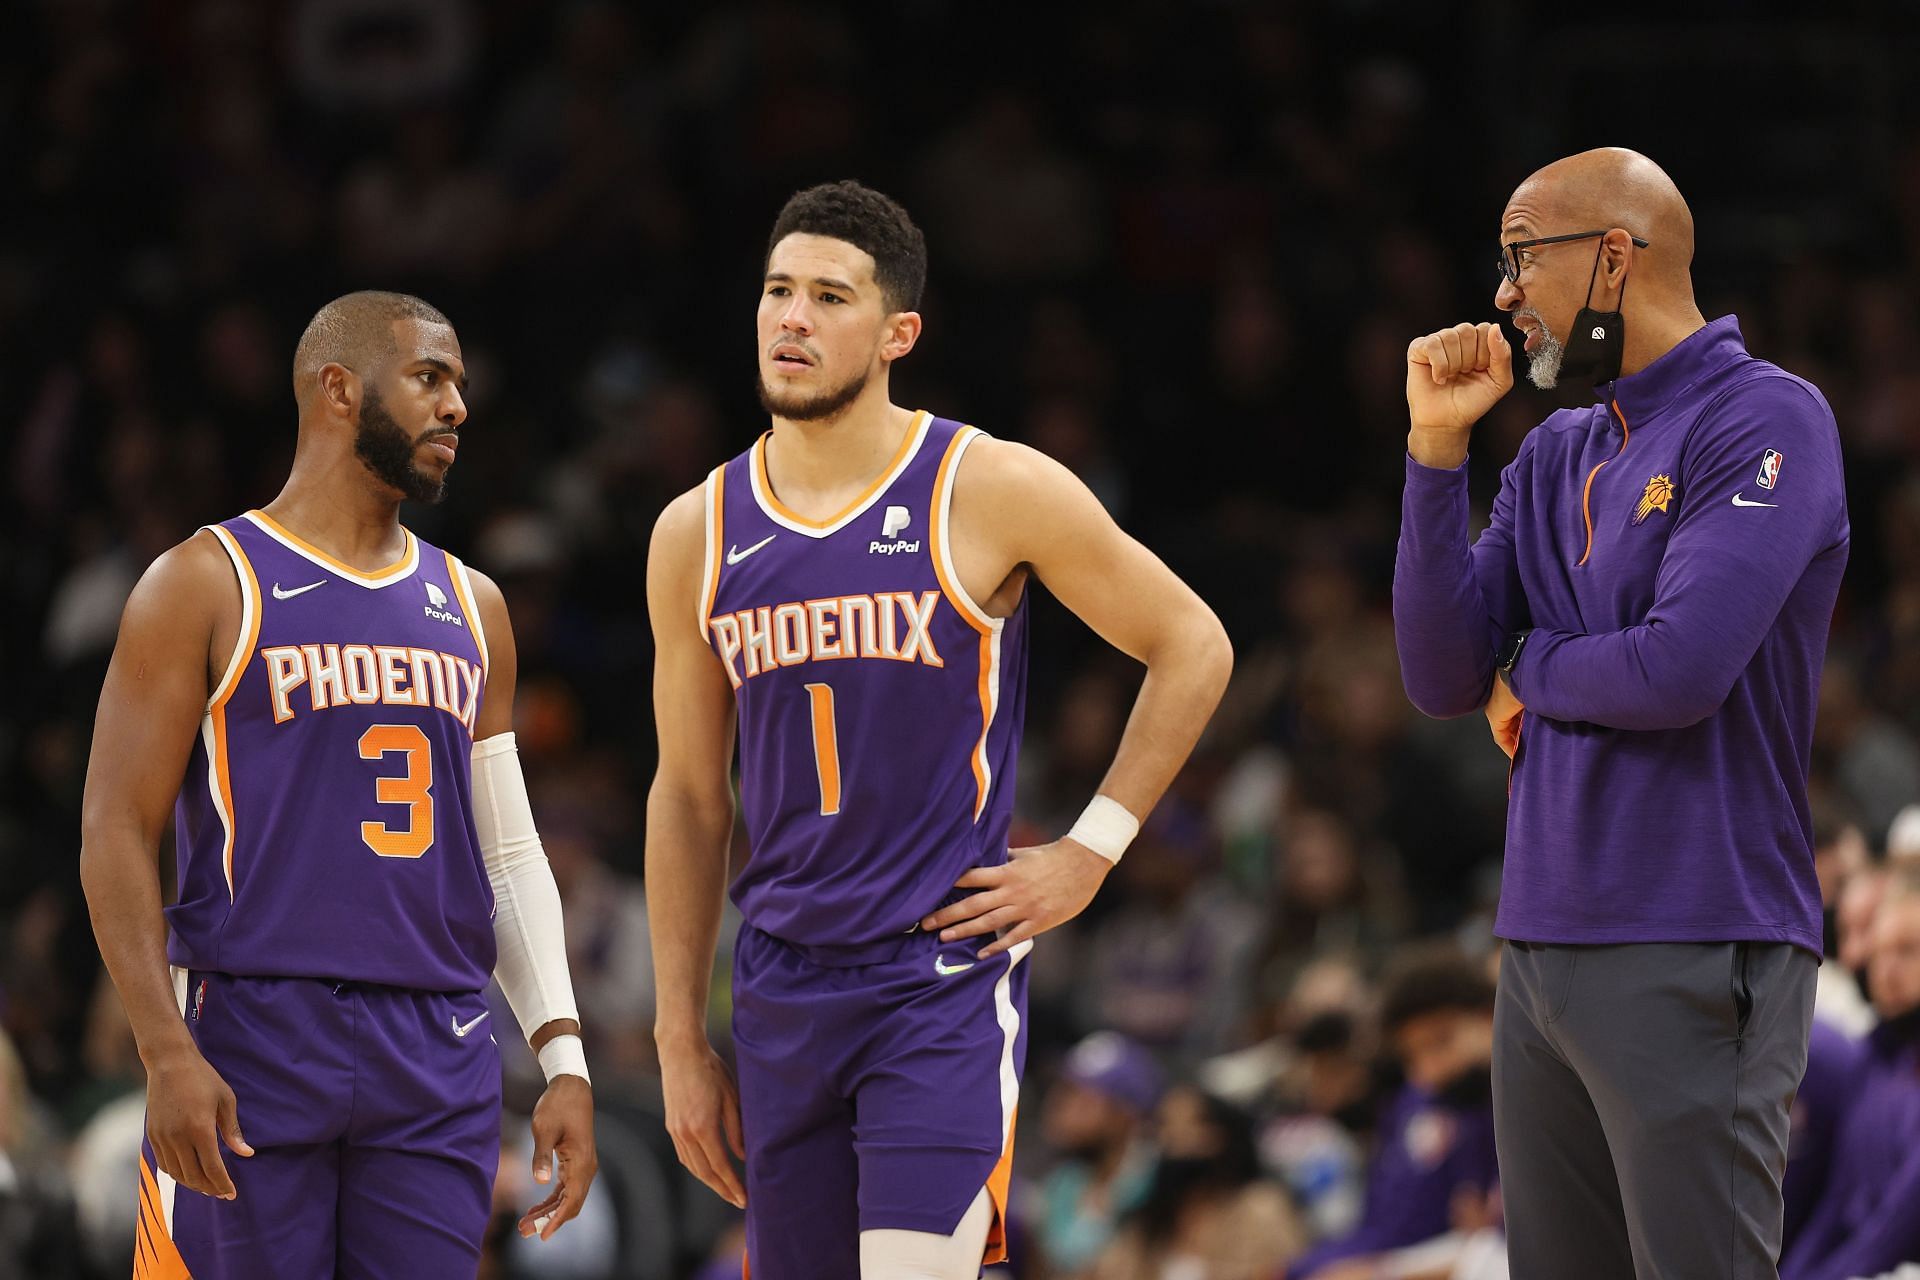 Coach Monty Williams of the Phoenix Suns talks with Chris Paul (3) and Devin Booker against the Charlotte Hornets on Dec. 19 in Phoenix, Arizona. The Suns defeated the Hornets 137-106.